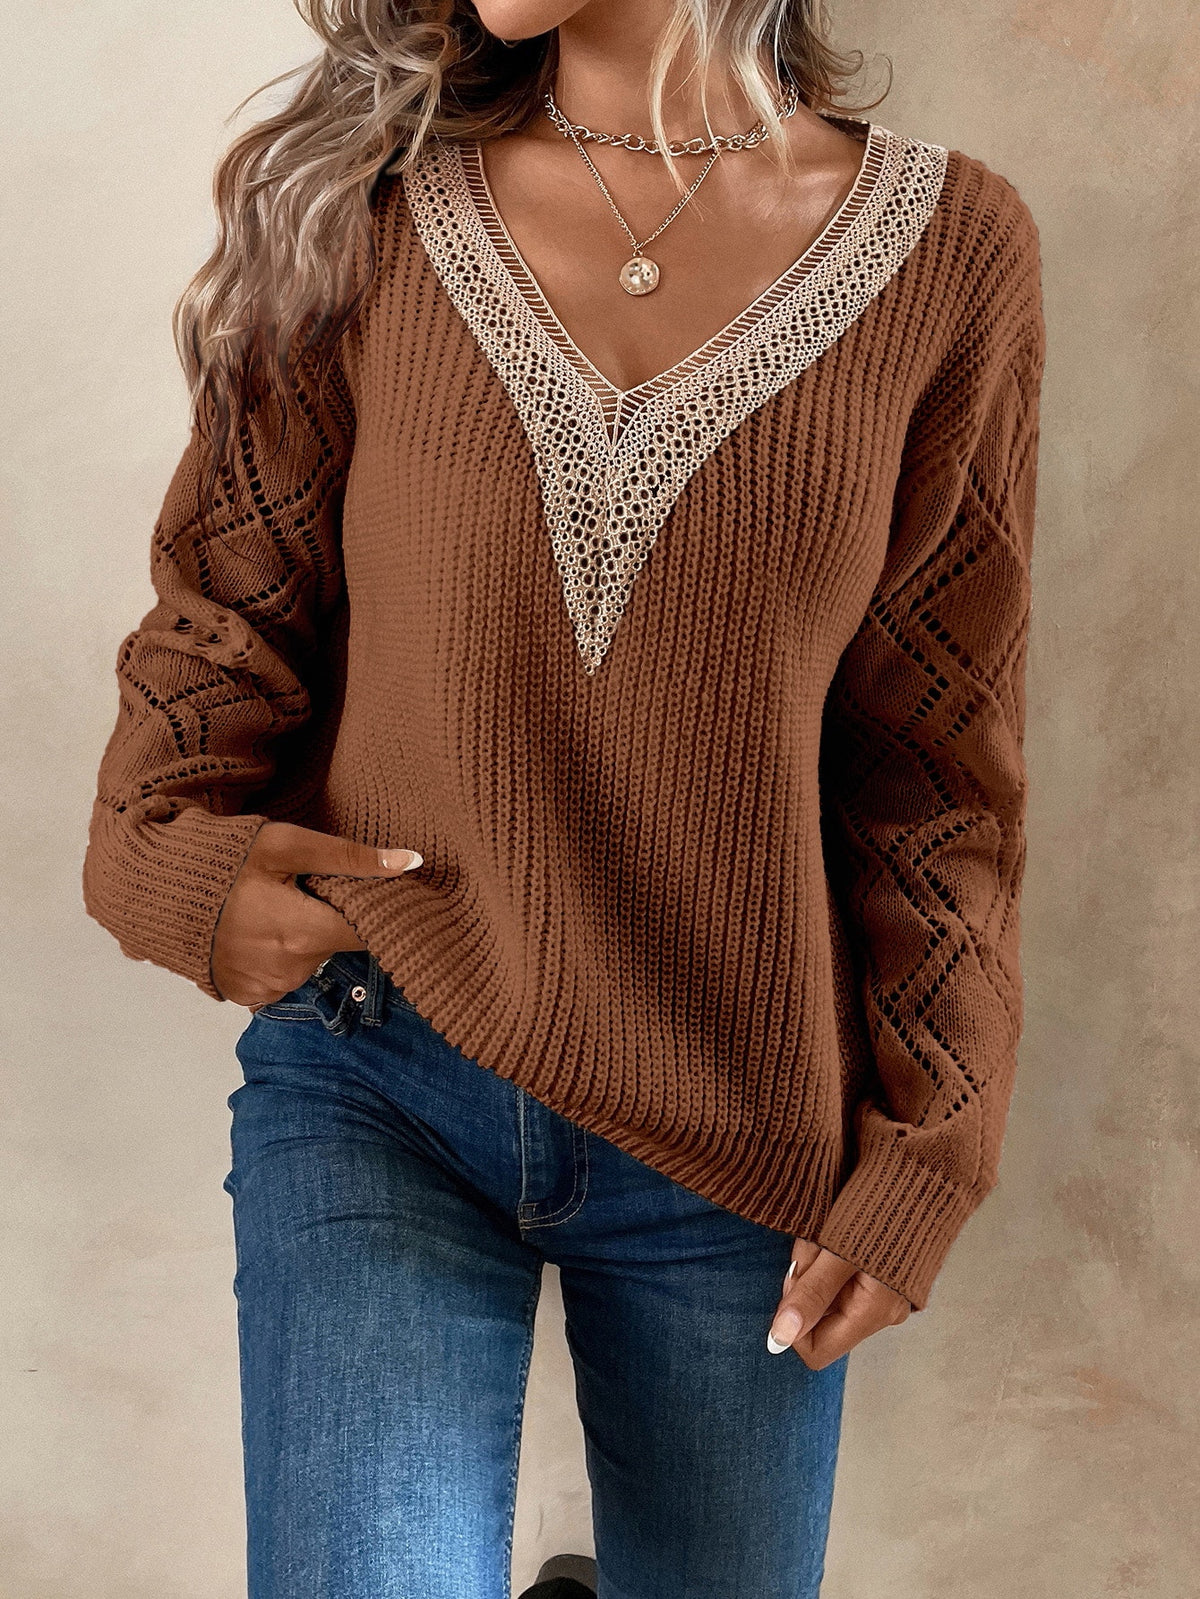 Knit Drop Shoulder Sweater with Lace Panel | Pomona and Peach Beige / S